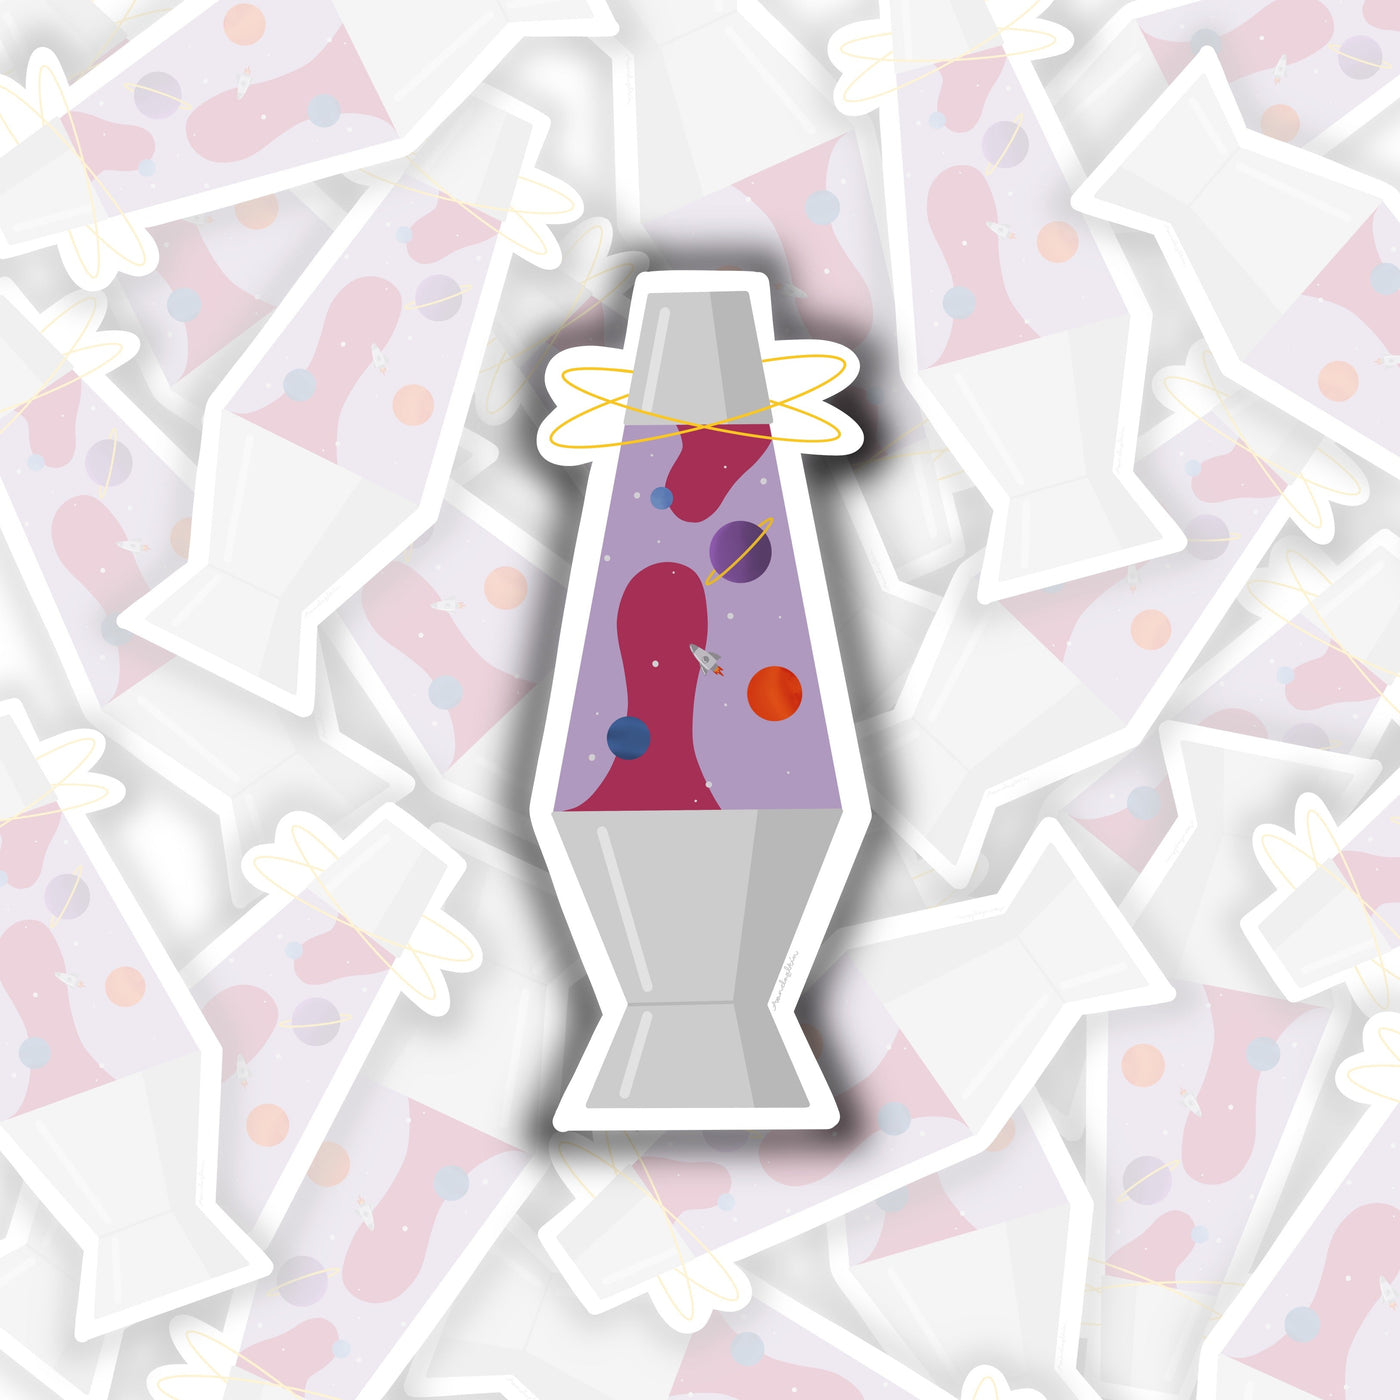 this sticker is a lava lamp. scattered in the lava lamp are the planets and one rocketship. there are also stars. around the top of the lava lamp are two rings.